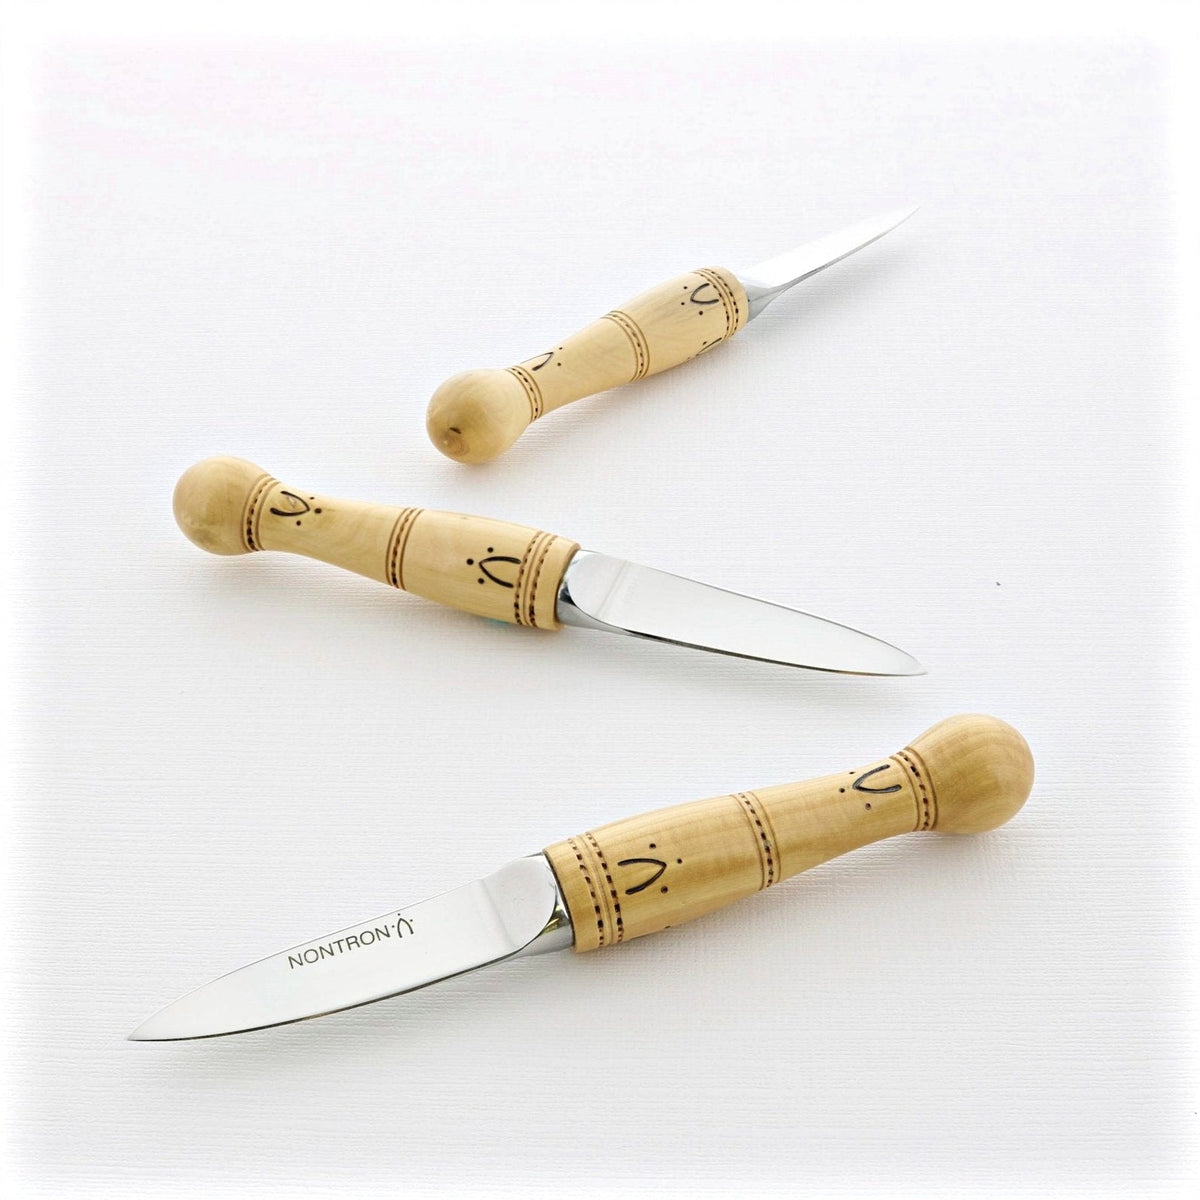 Nontron Oyster knife Boxwood Handle